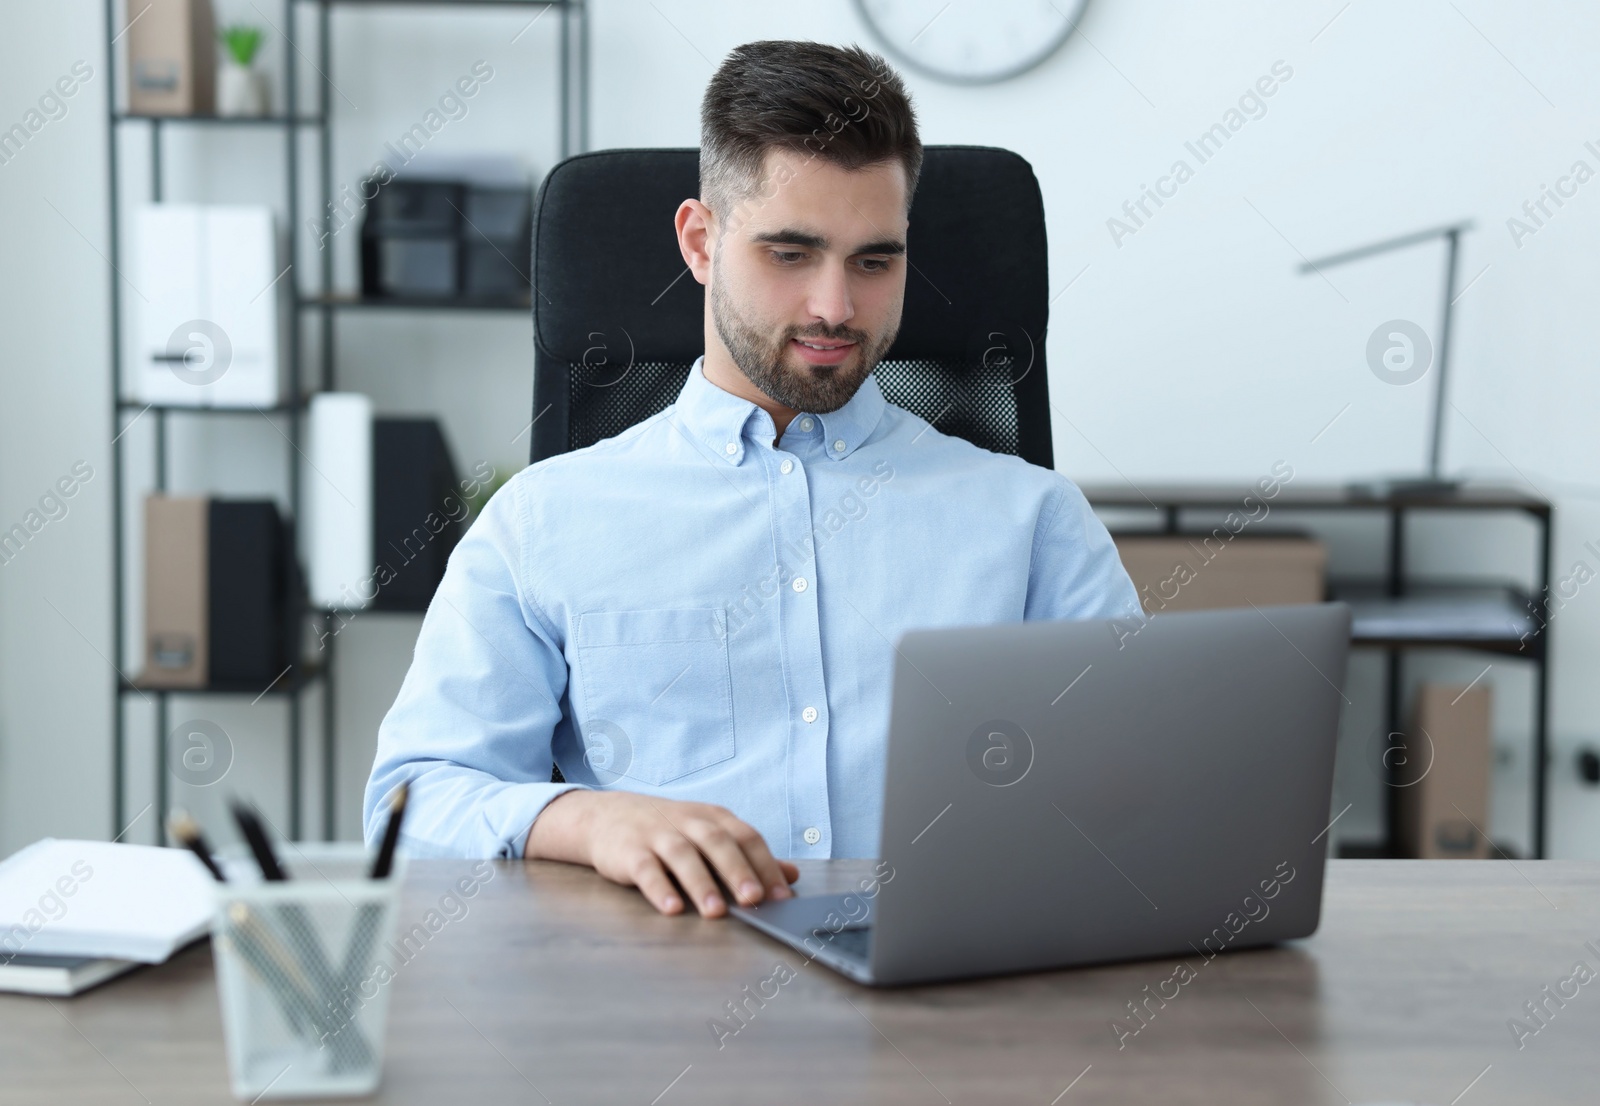 Photo of Young programmer working with laptop in office